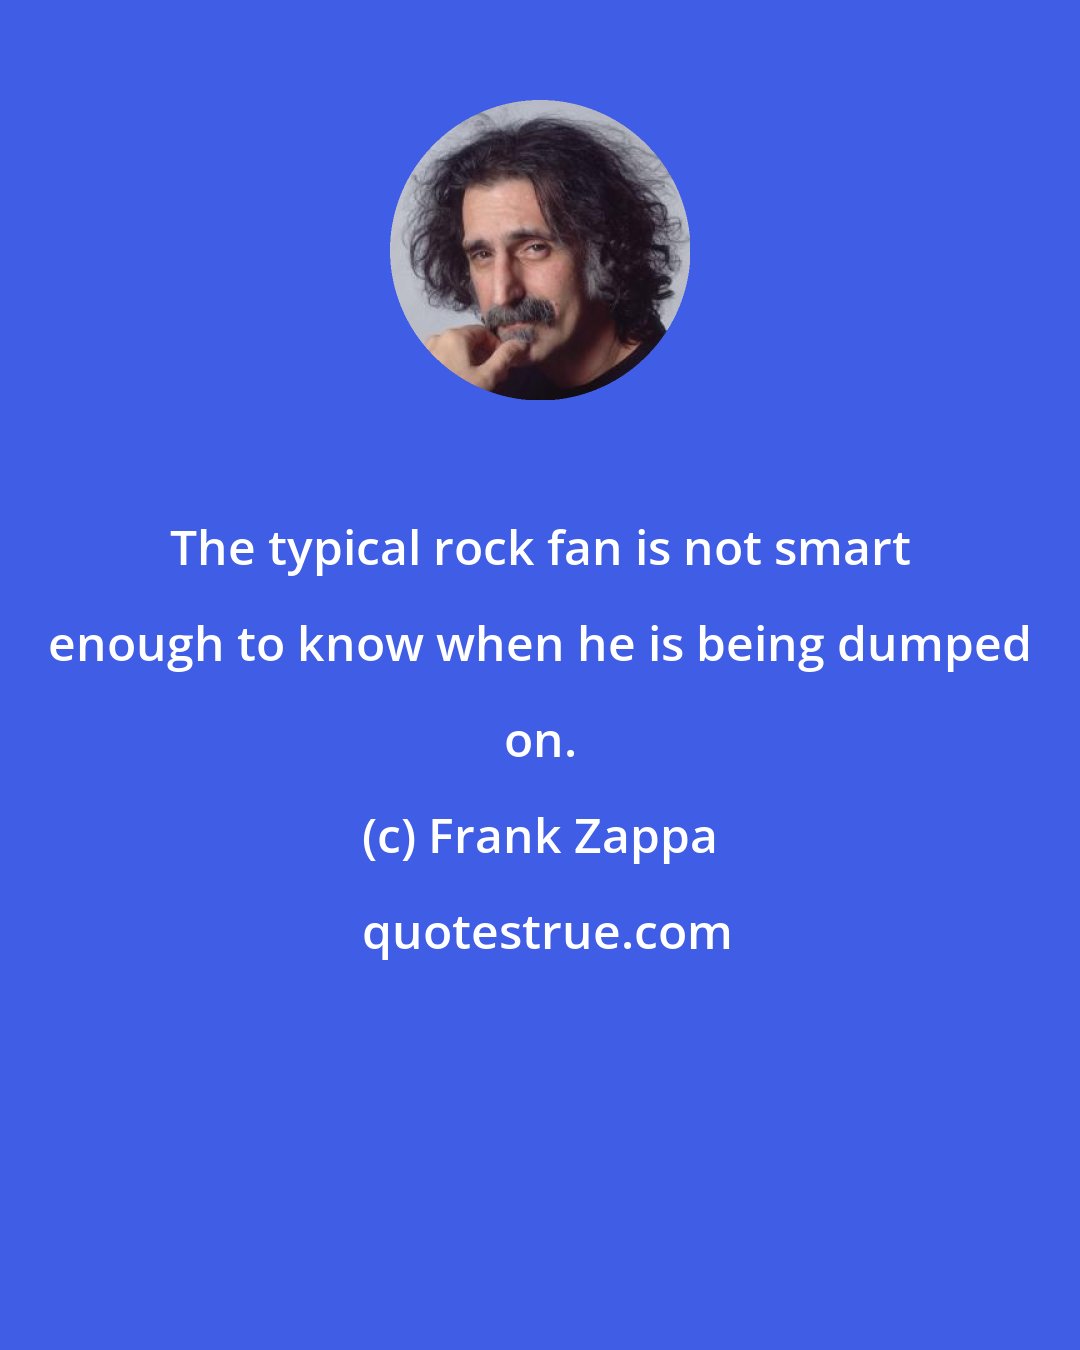 Frank Zappa: The typical rock fan is not smart enough to know when he is being dumped on.